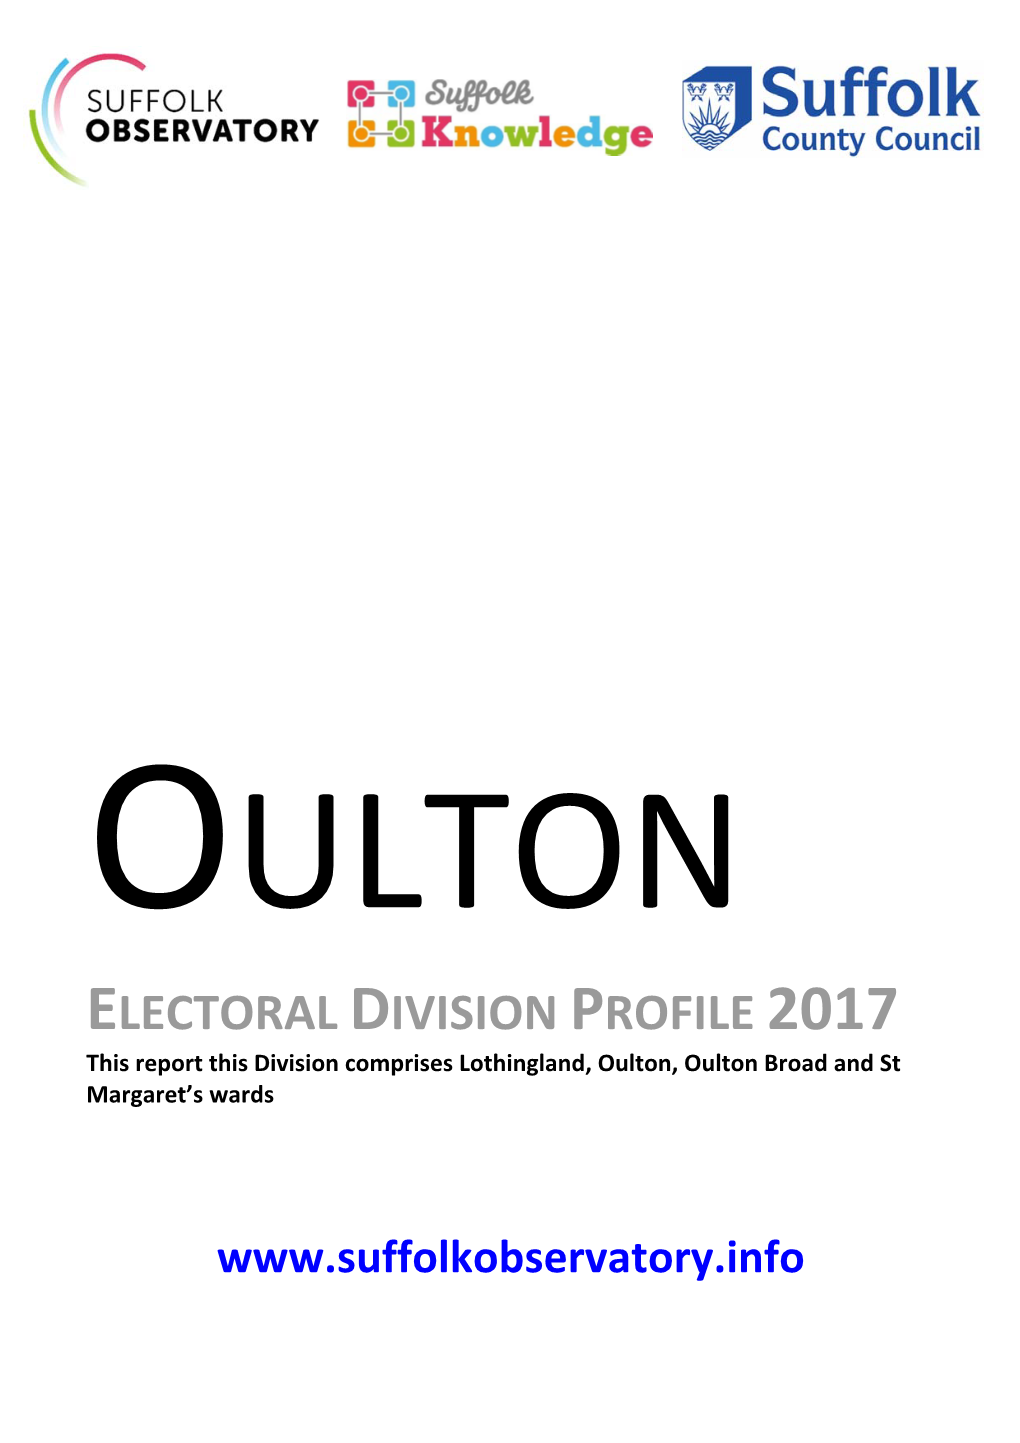 ELECTORAL DIVISION PROFILE 2017 This Report This Division Comprises Lothingland, Oulton, Oulton Broad and St Margaret’S Wards